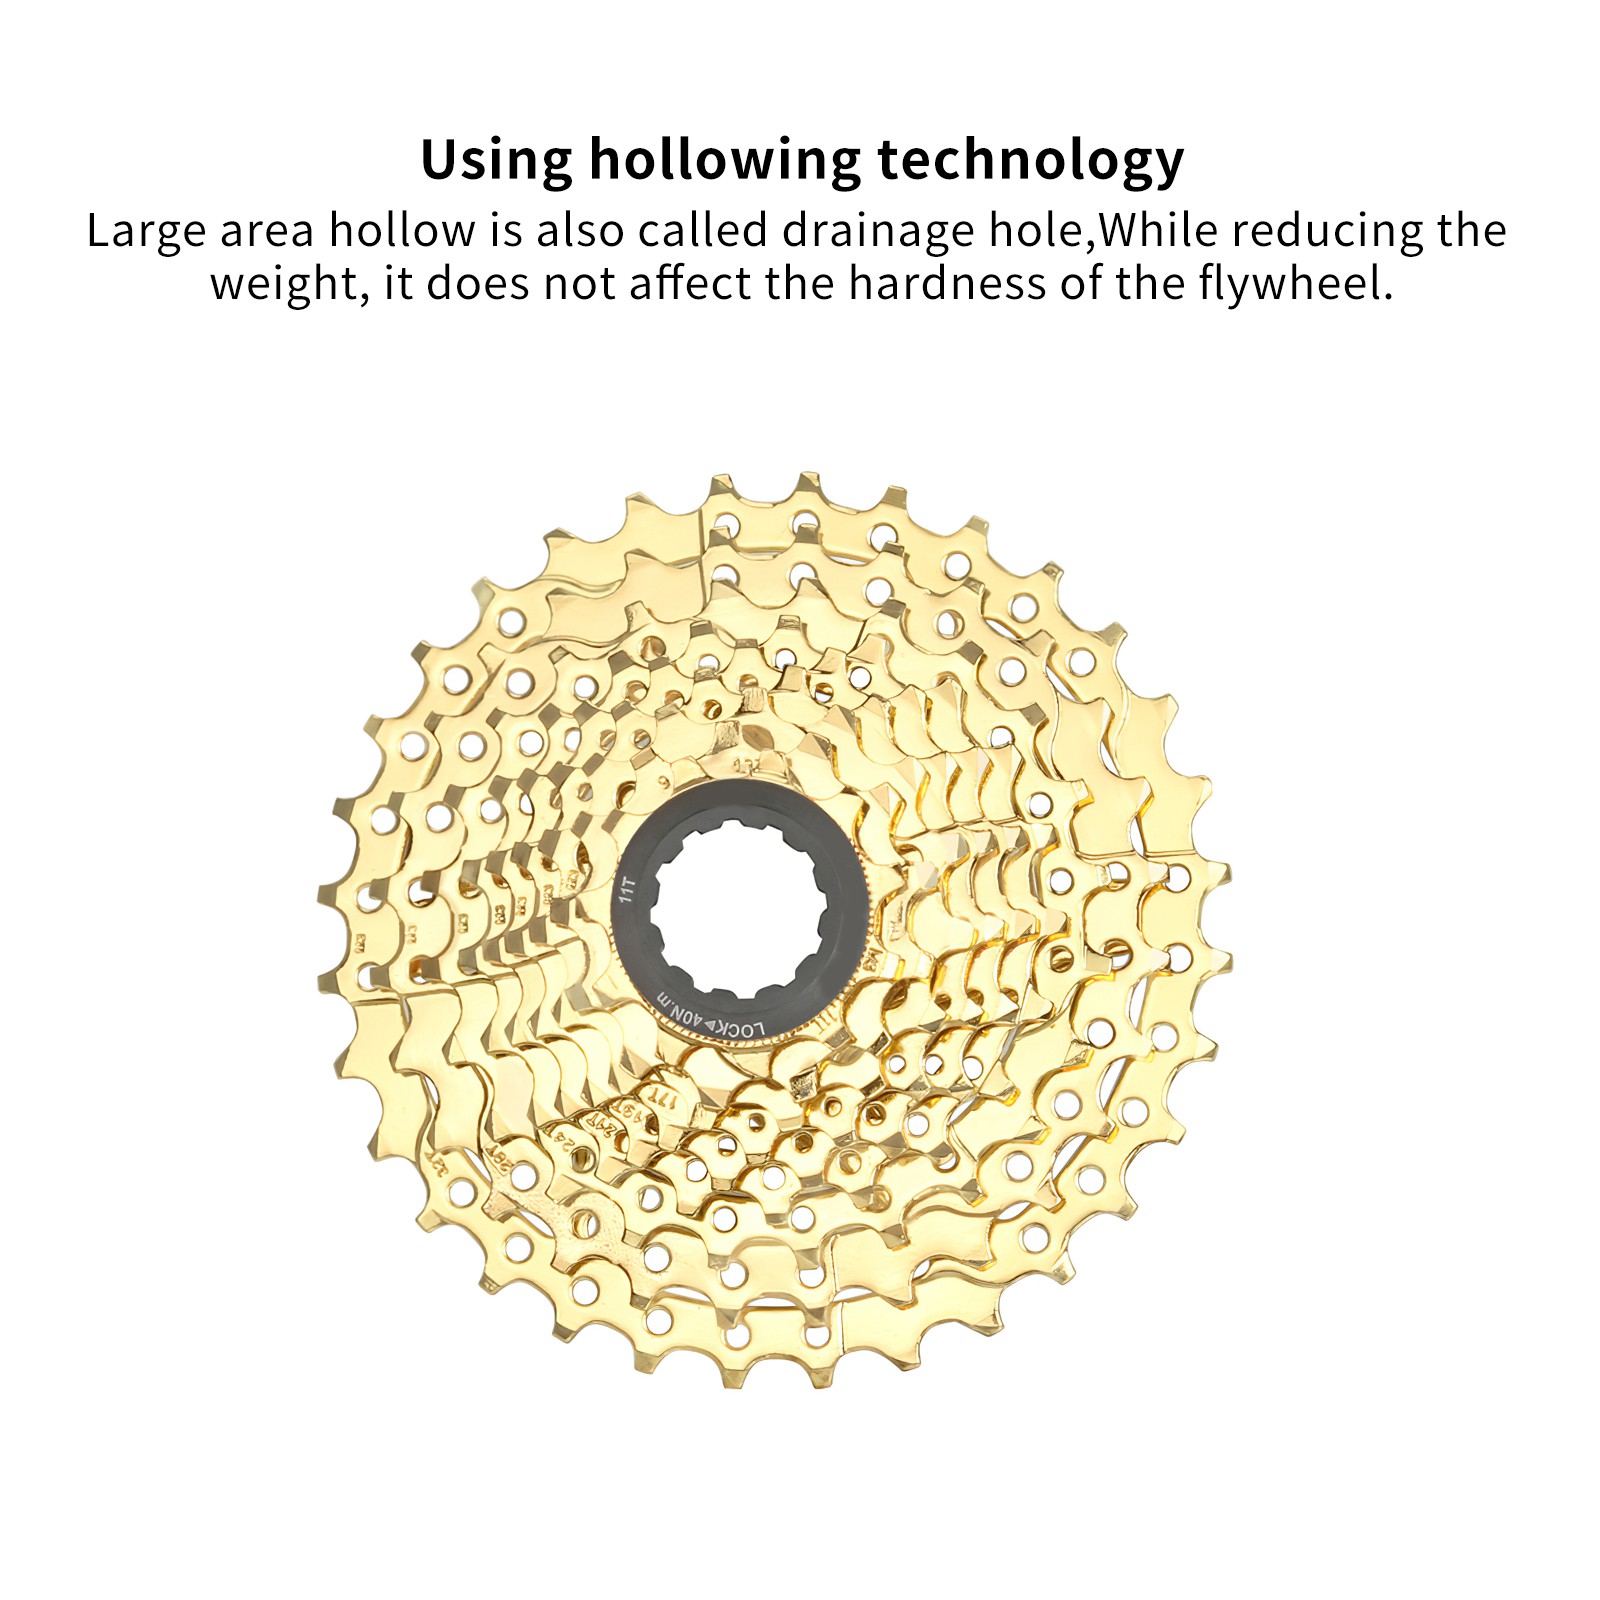 YGCX5-Bicycle Cassette 9 Speeds 11-32T Chrome-Molybdenum Steel Mountain Bike Flywheel Durable Hollow Design Golden Bicycle Parts Climbing Flywheel Cycling Accessories